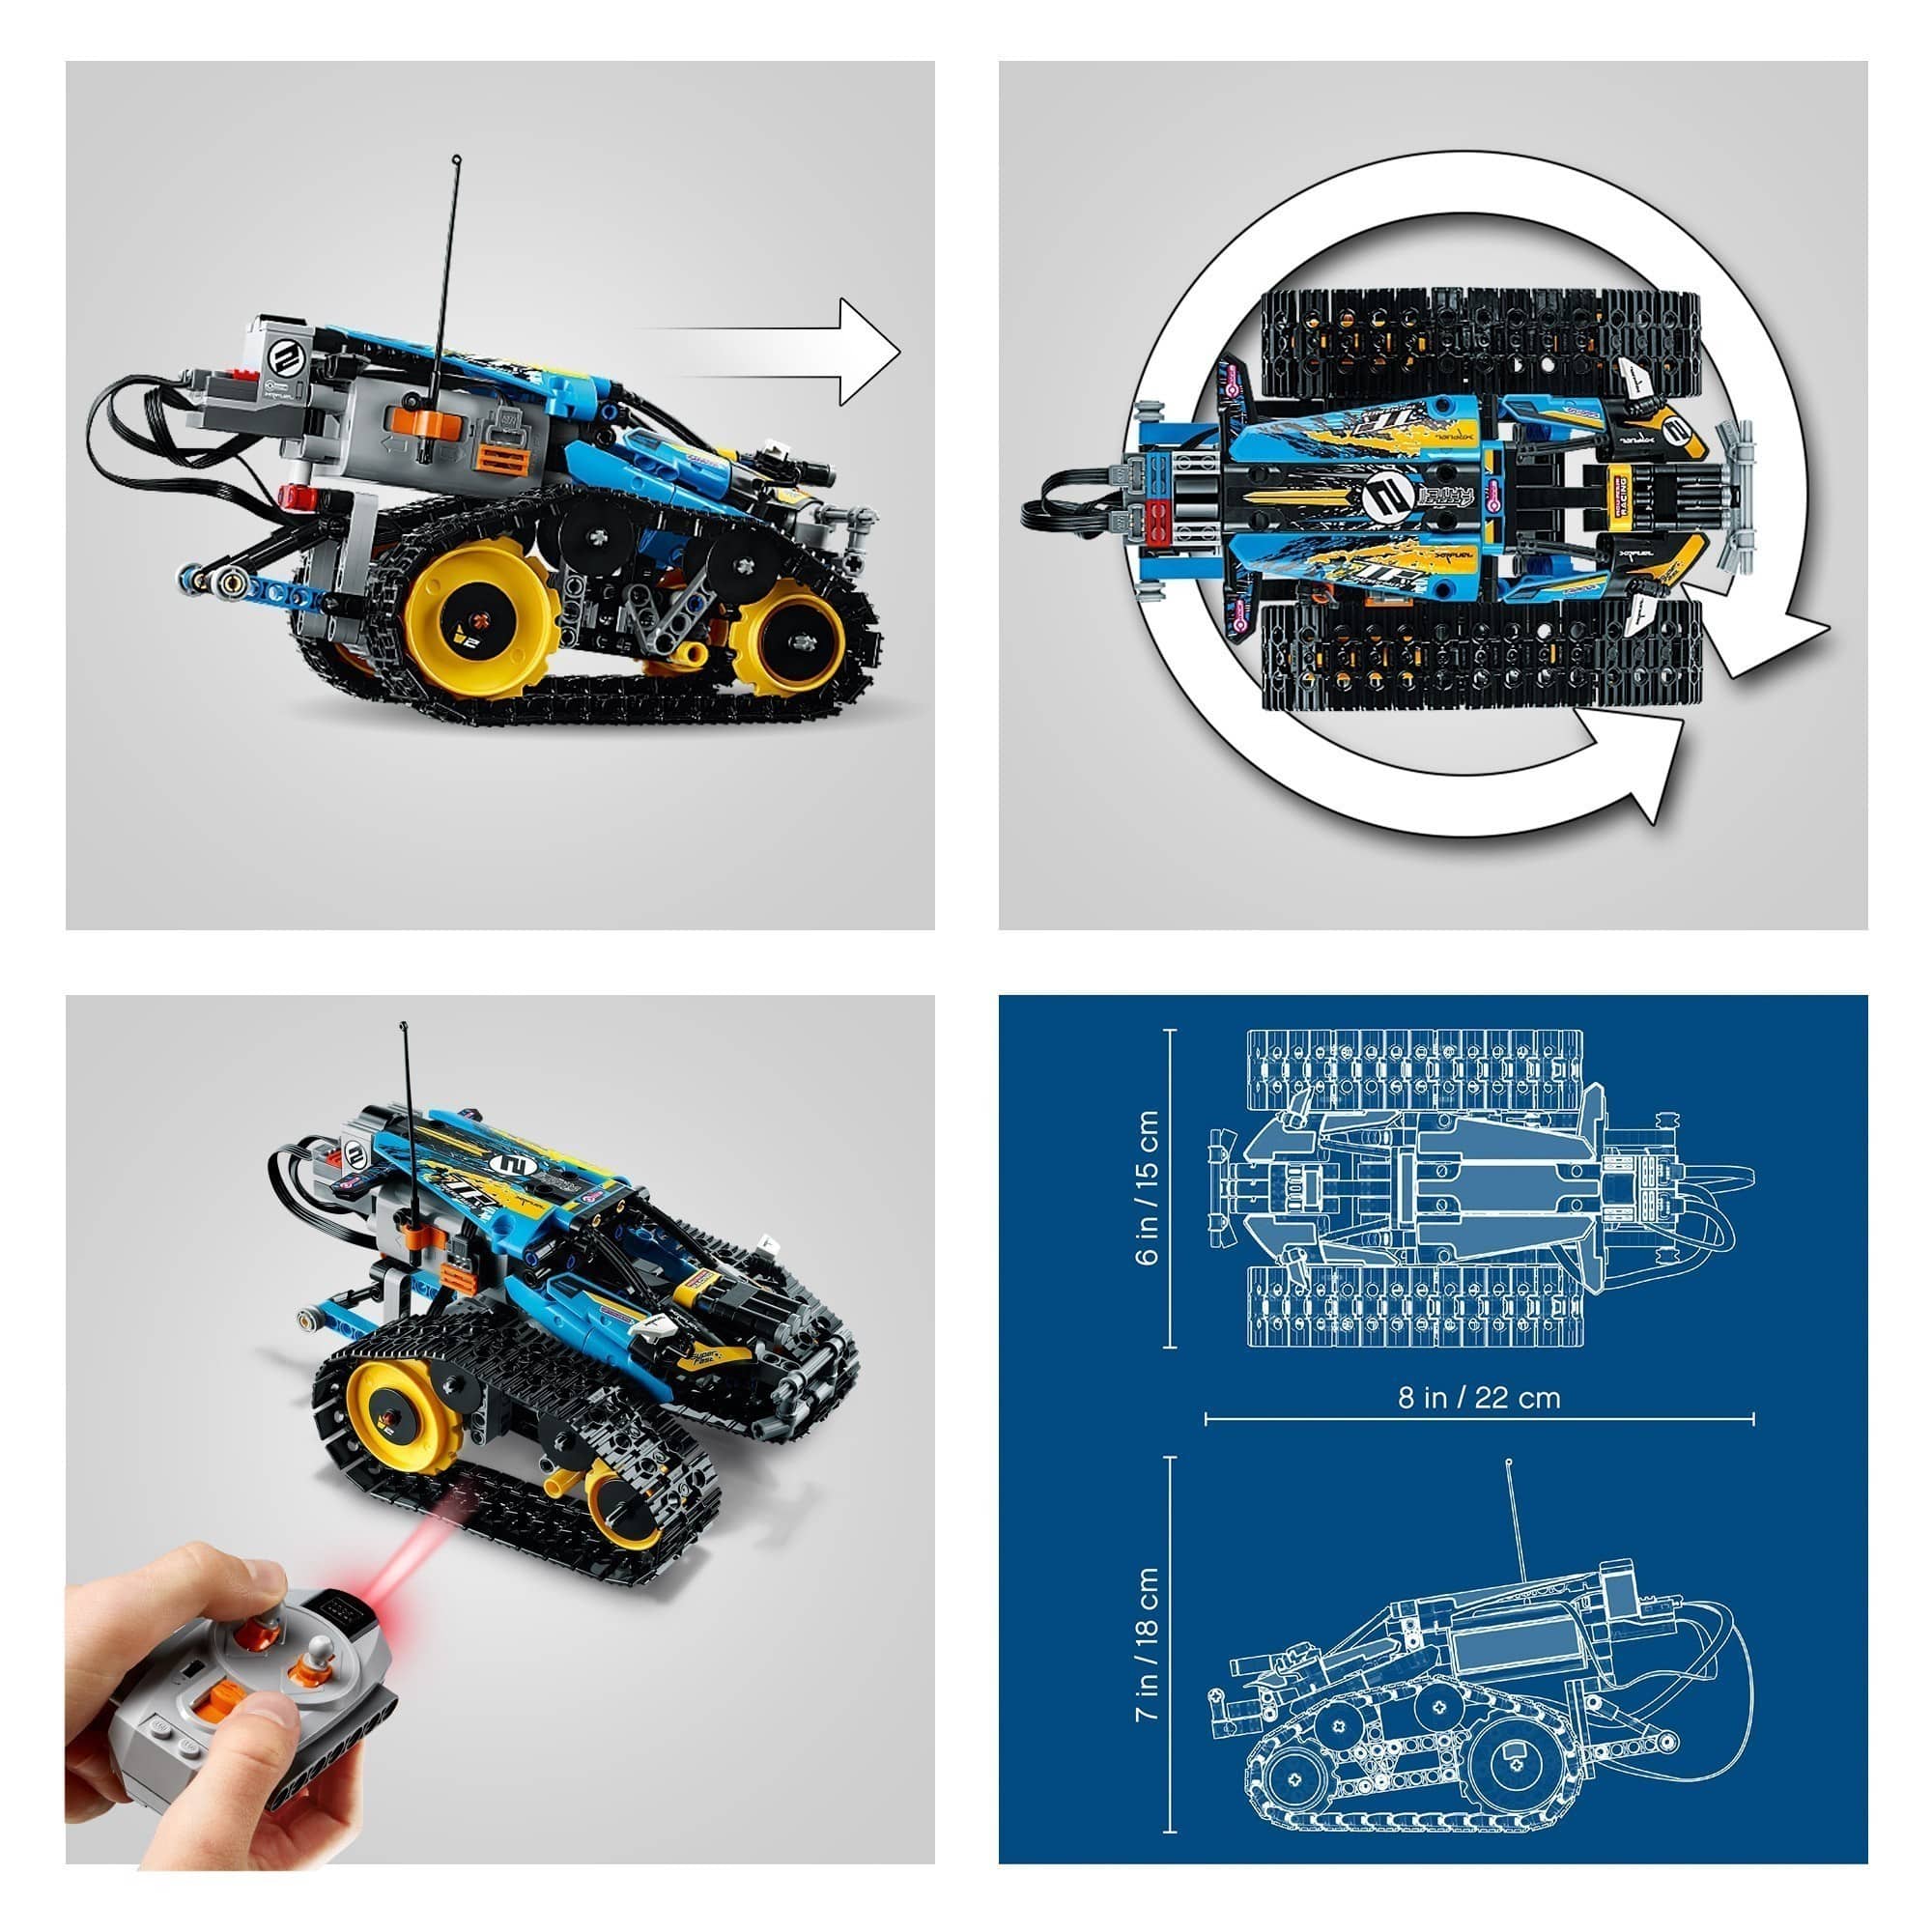 LEGO® Technic™ 42095 - Remote-Controlled Stunt Racer